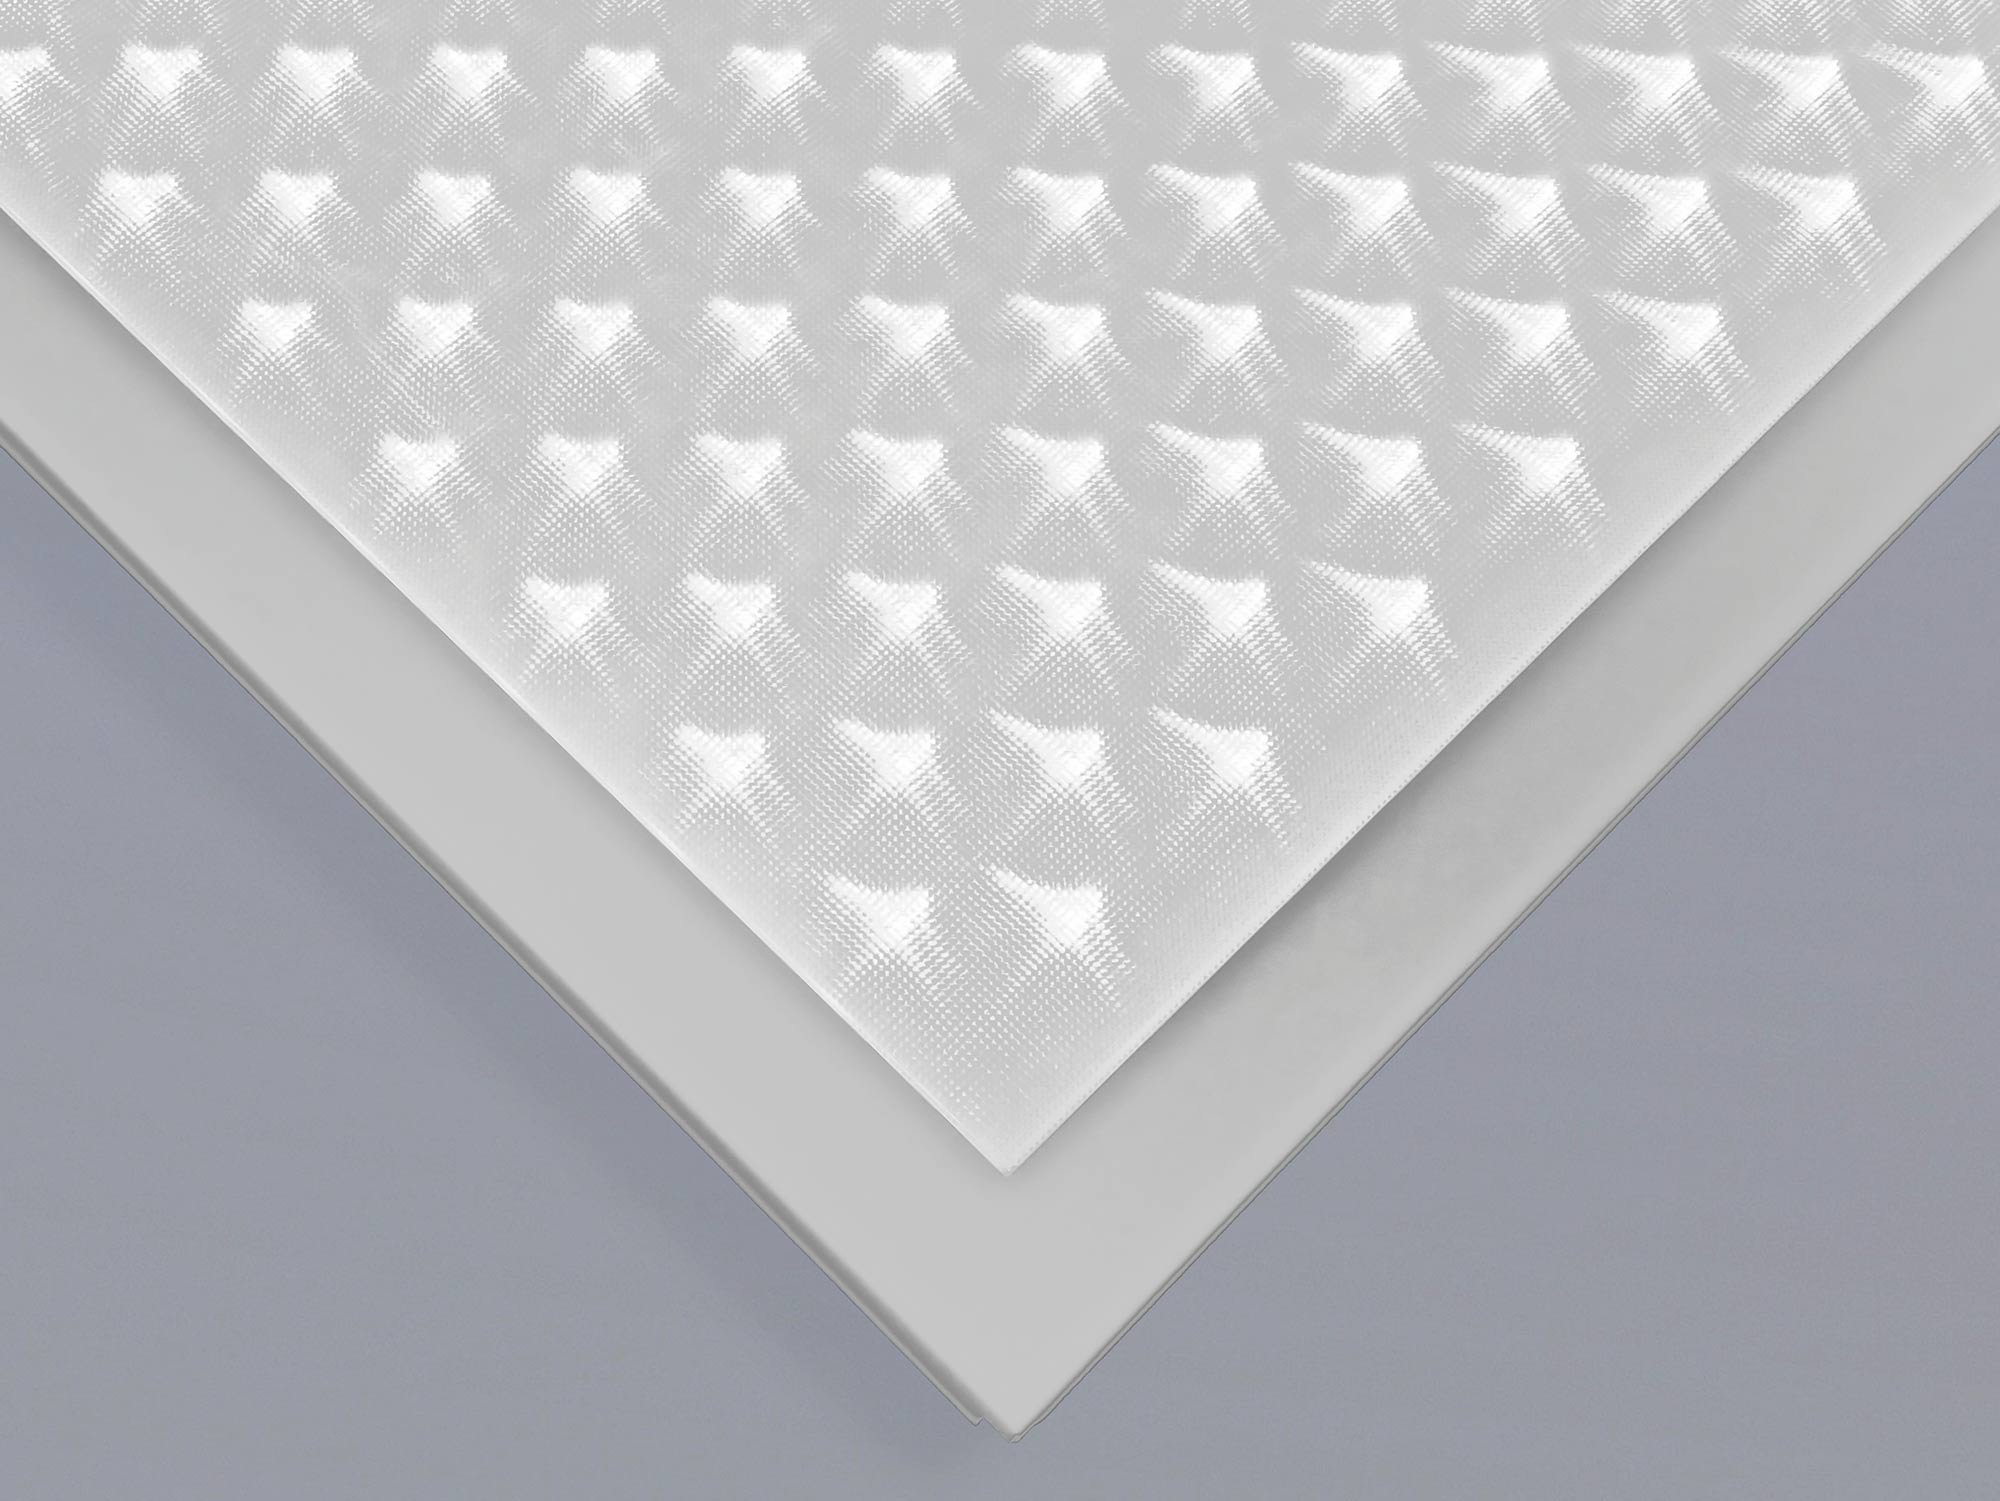 LED luminaire Quattro-Line for lay-in tiles with micro prism cover IP65